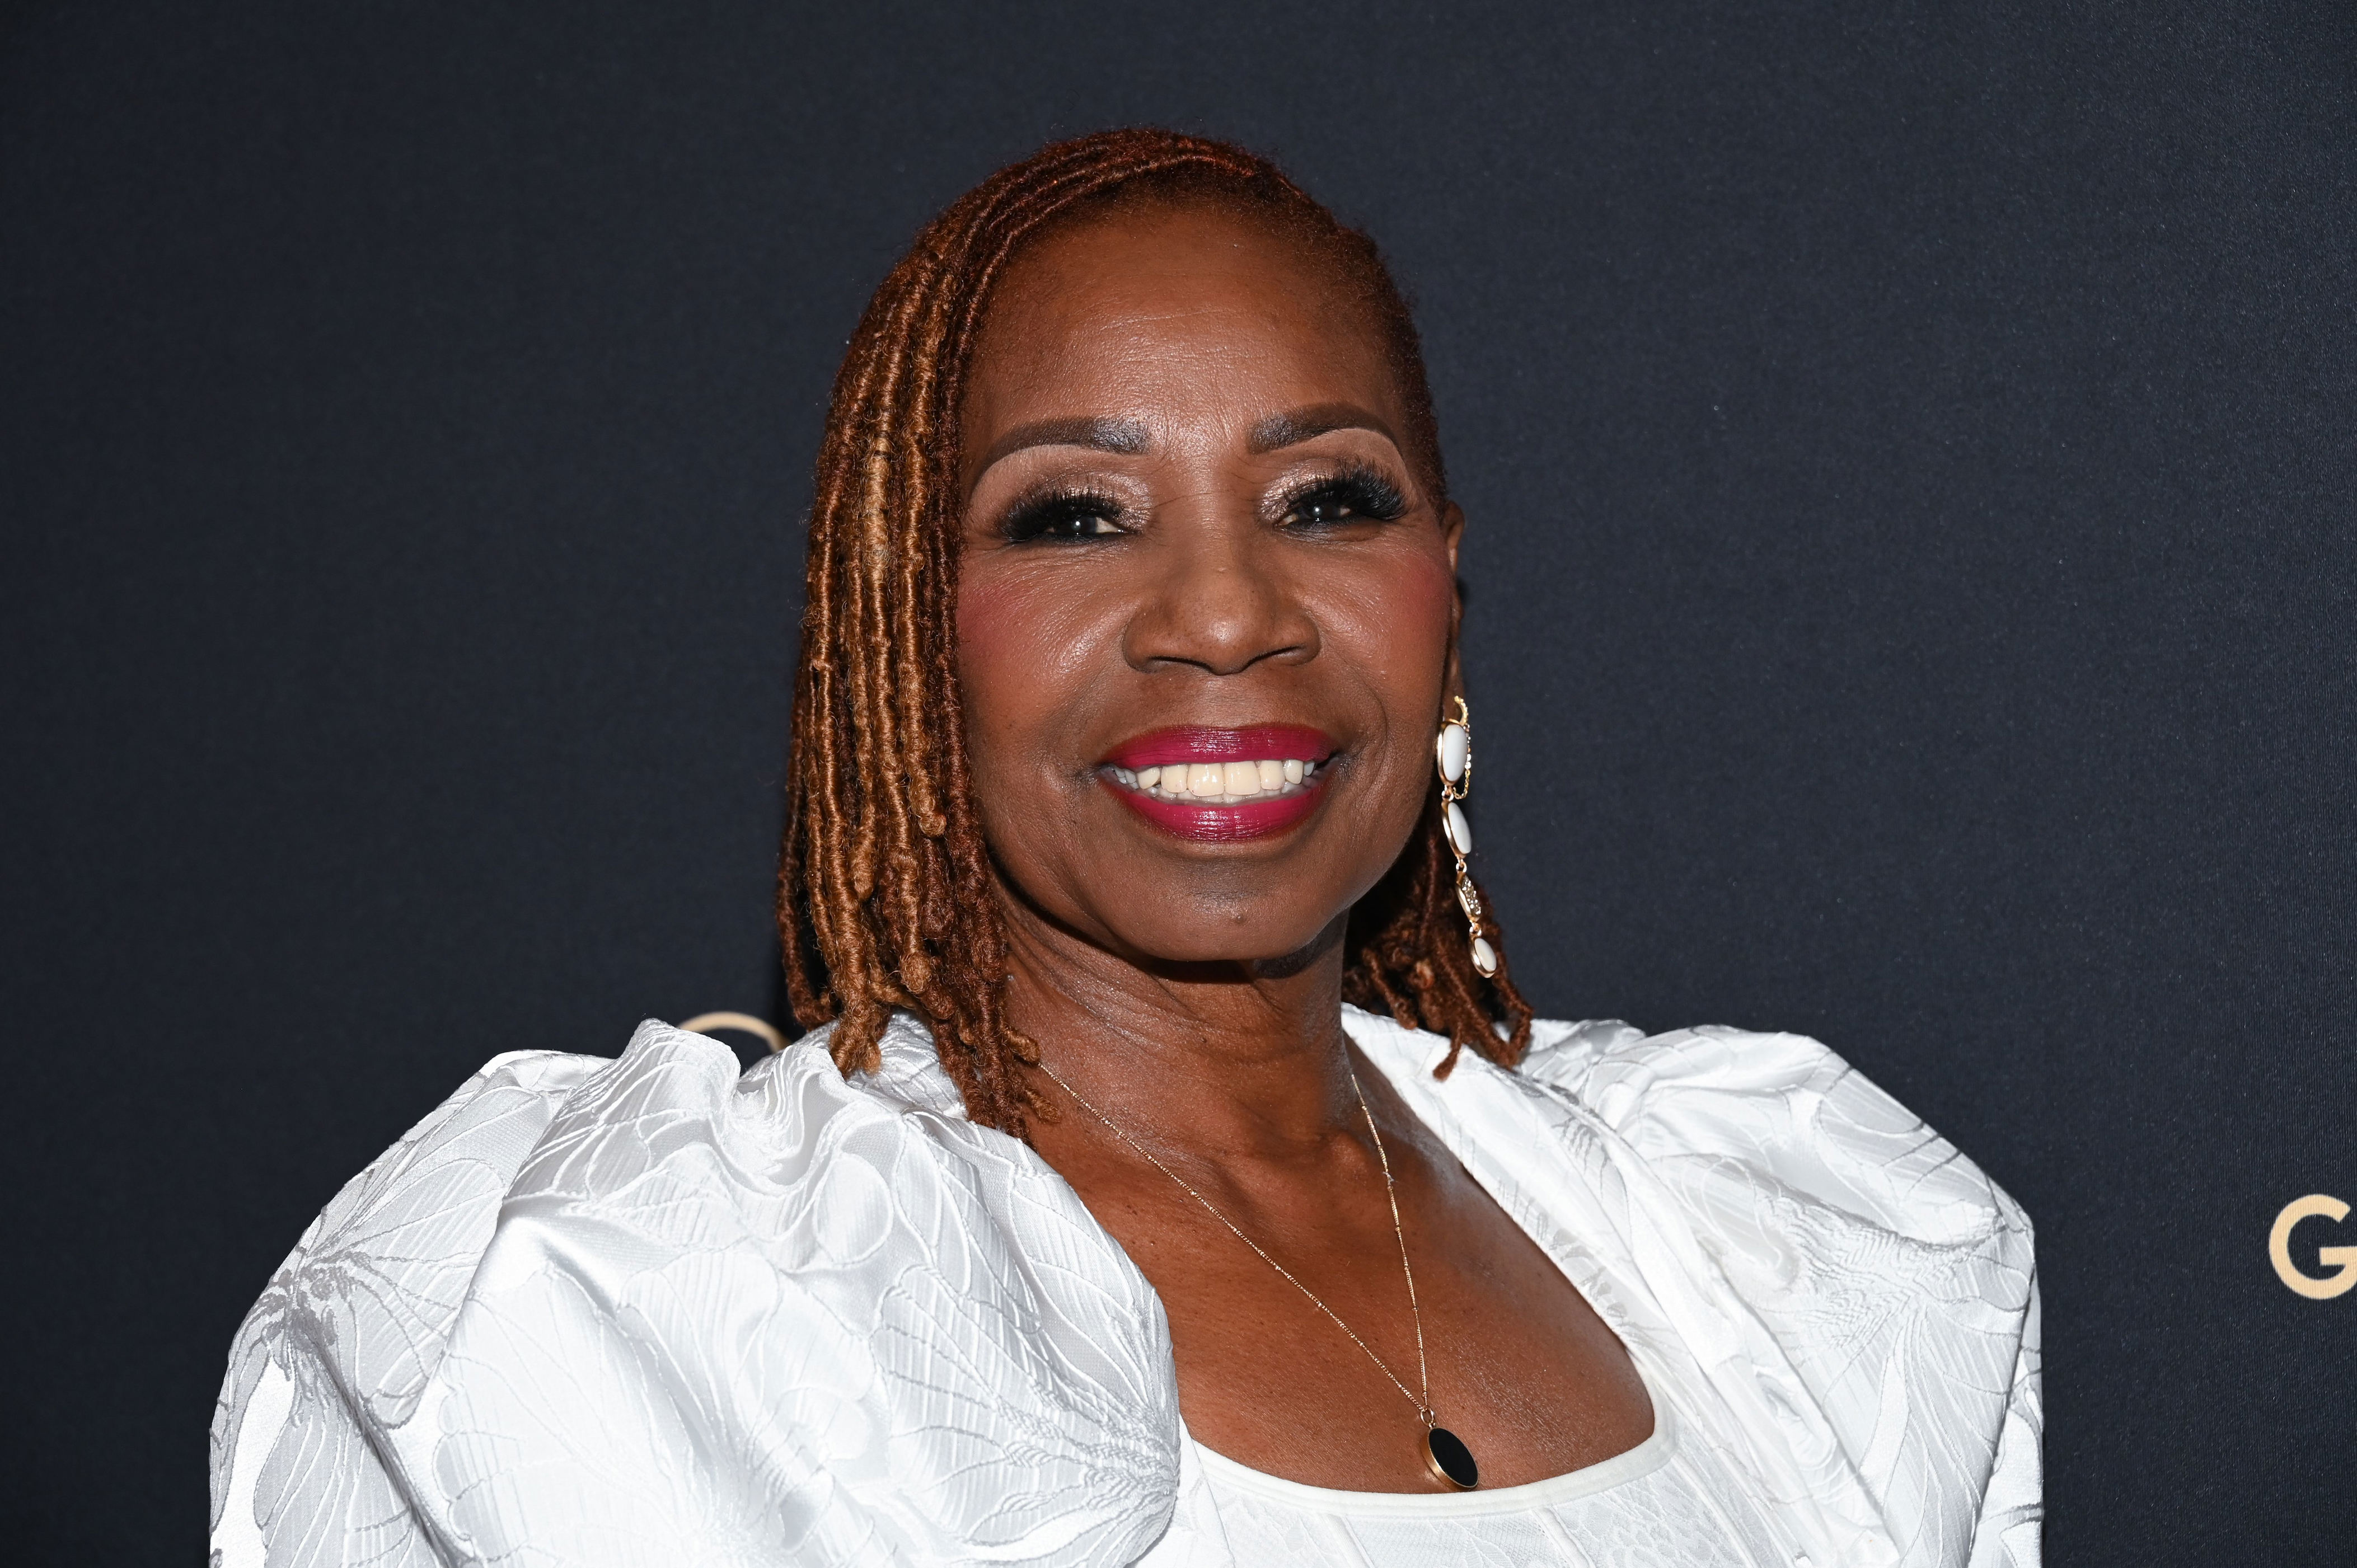 <p><span>Almost 20 years after daughter Gemmia died from colon cancer at 32 on Christmas Day in 2003, "Iyanla: Fix My Life" host Iyanla Vanzant lost a second child, Nisa Vanzant. "It is with great sorrow that we announce the transition of Nisa Vanzant the youngest daughter of our Beloved Iyanla Vanzant," read a post on the life coach's Instagram account shared on July 30, 2023. "We are asking for your prayers. Please respect the privacy of her and her family at this time. Thank you." The message was accompanied by the words, "Nisa Vanzant 1974-2023." No other details were shared.  </span></p>